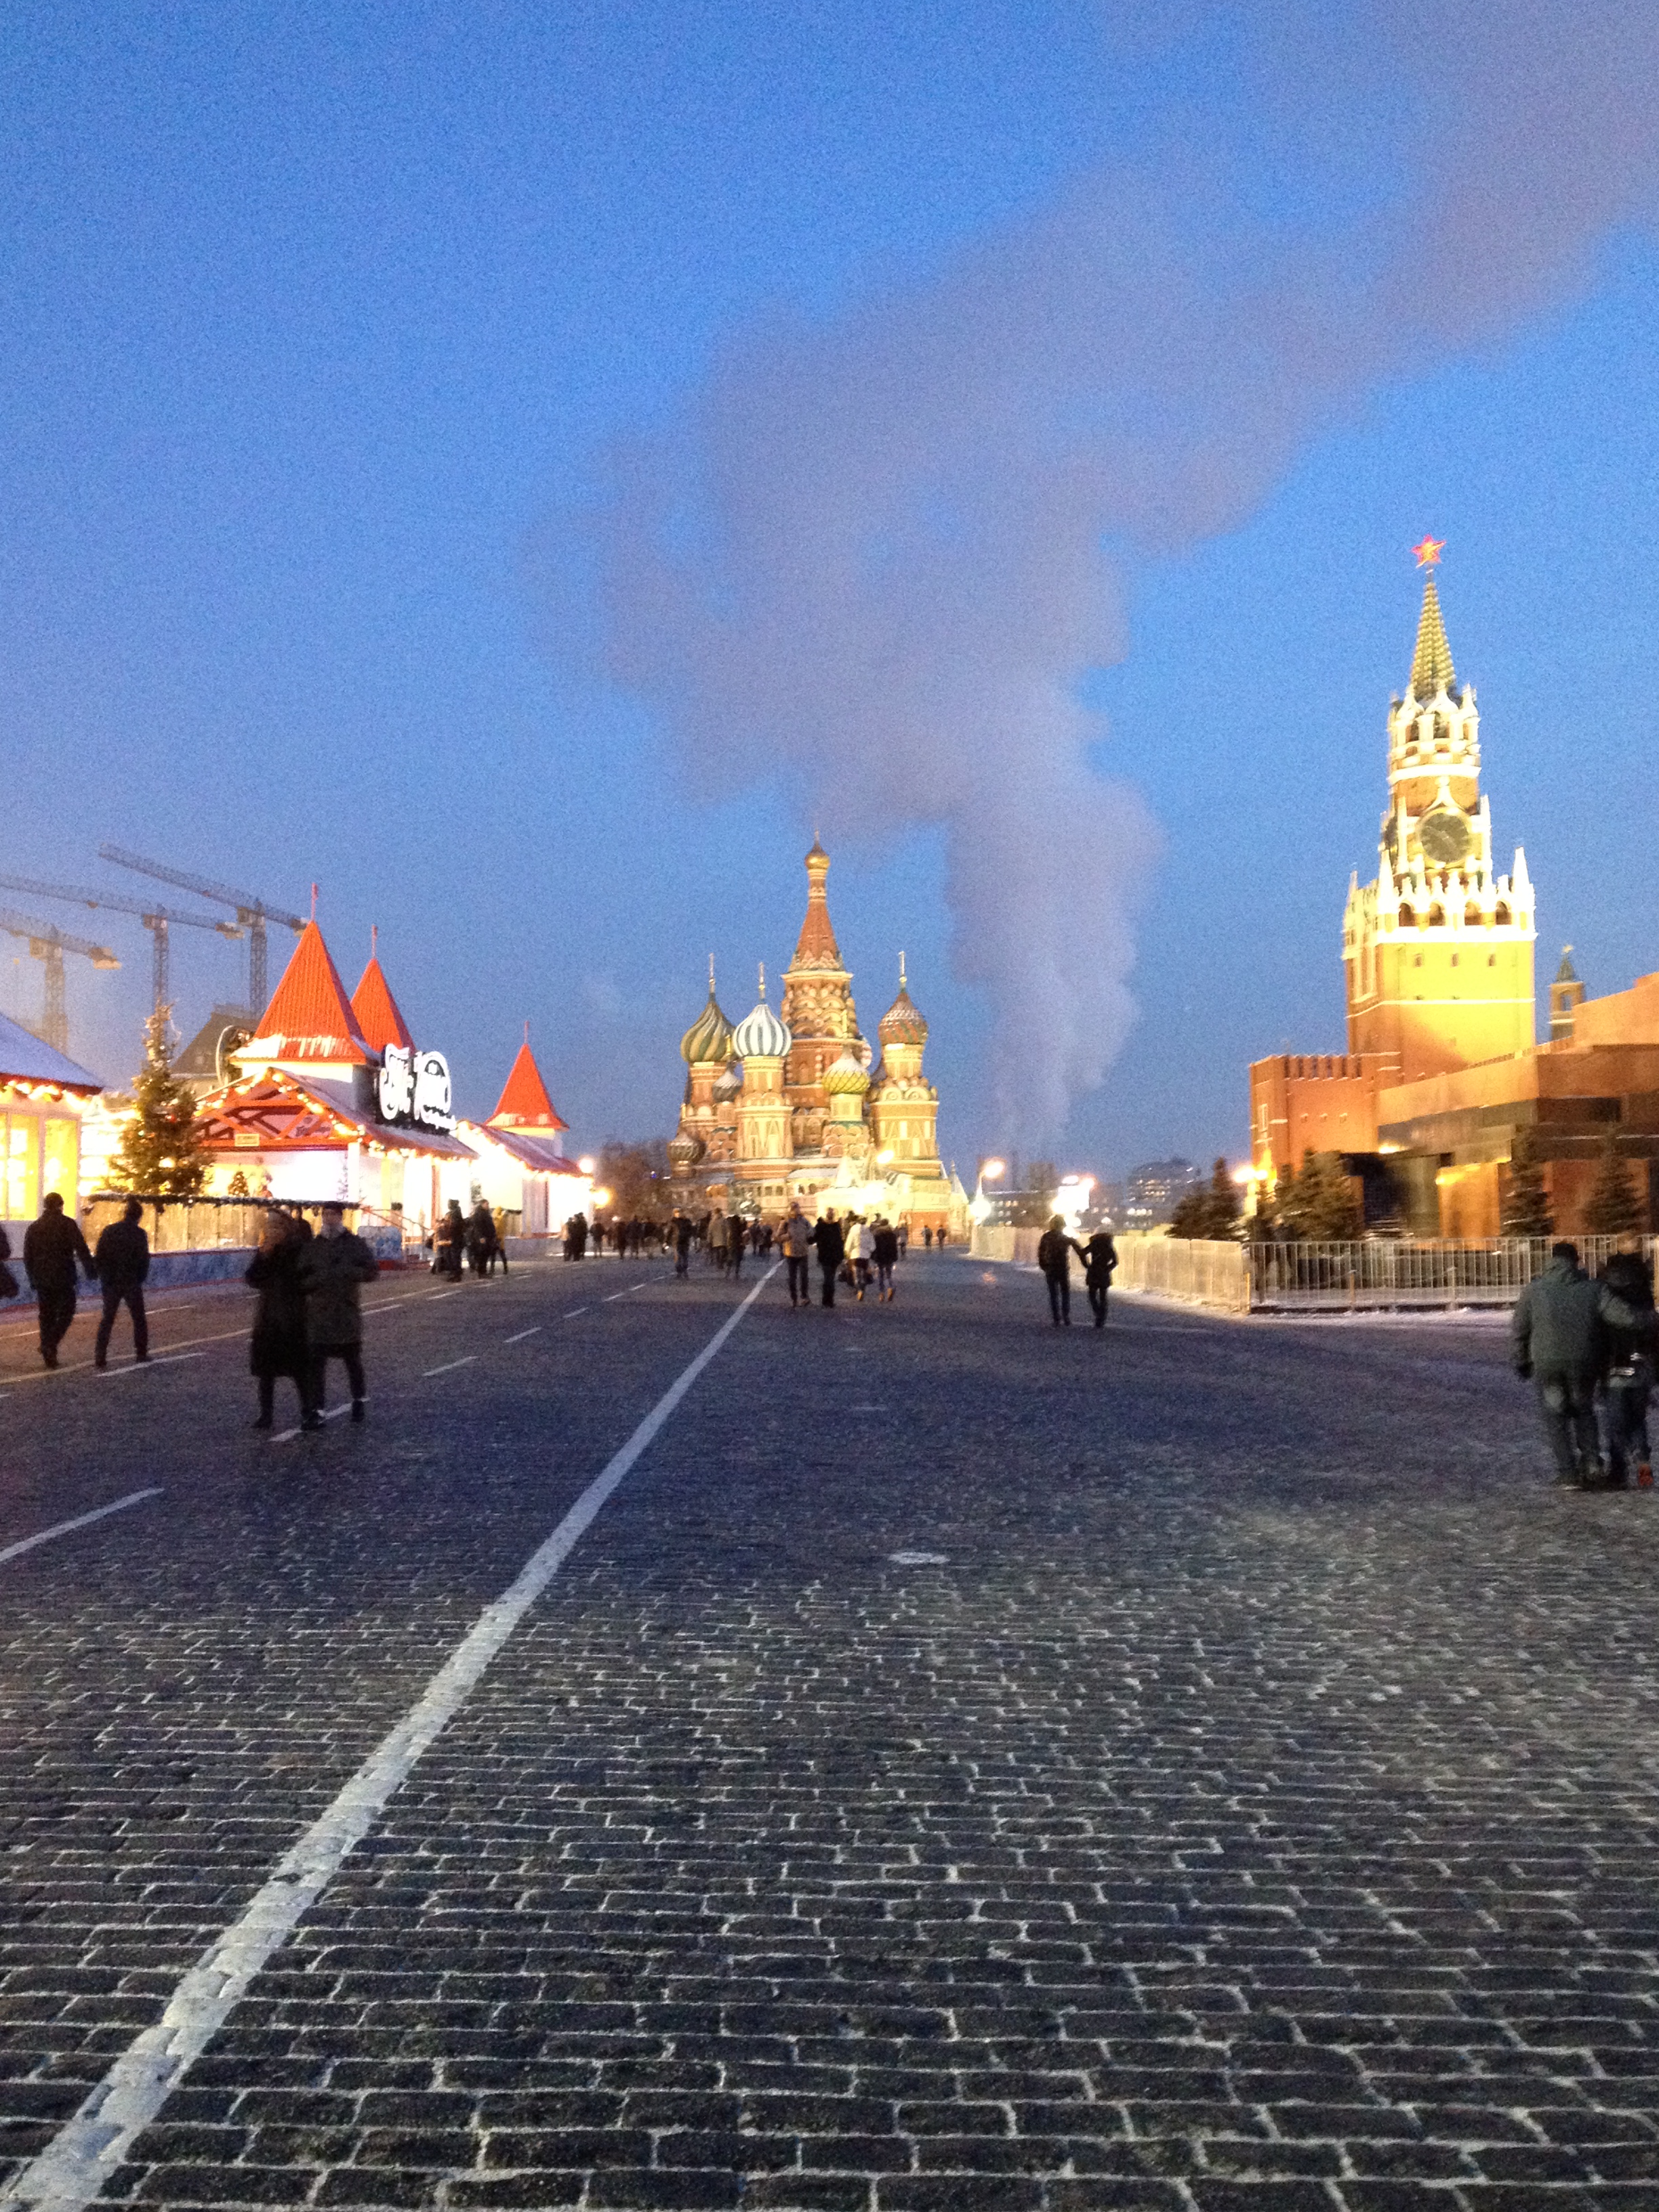 The Red Square 